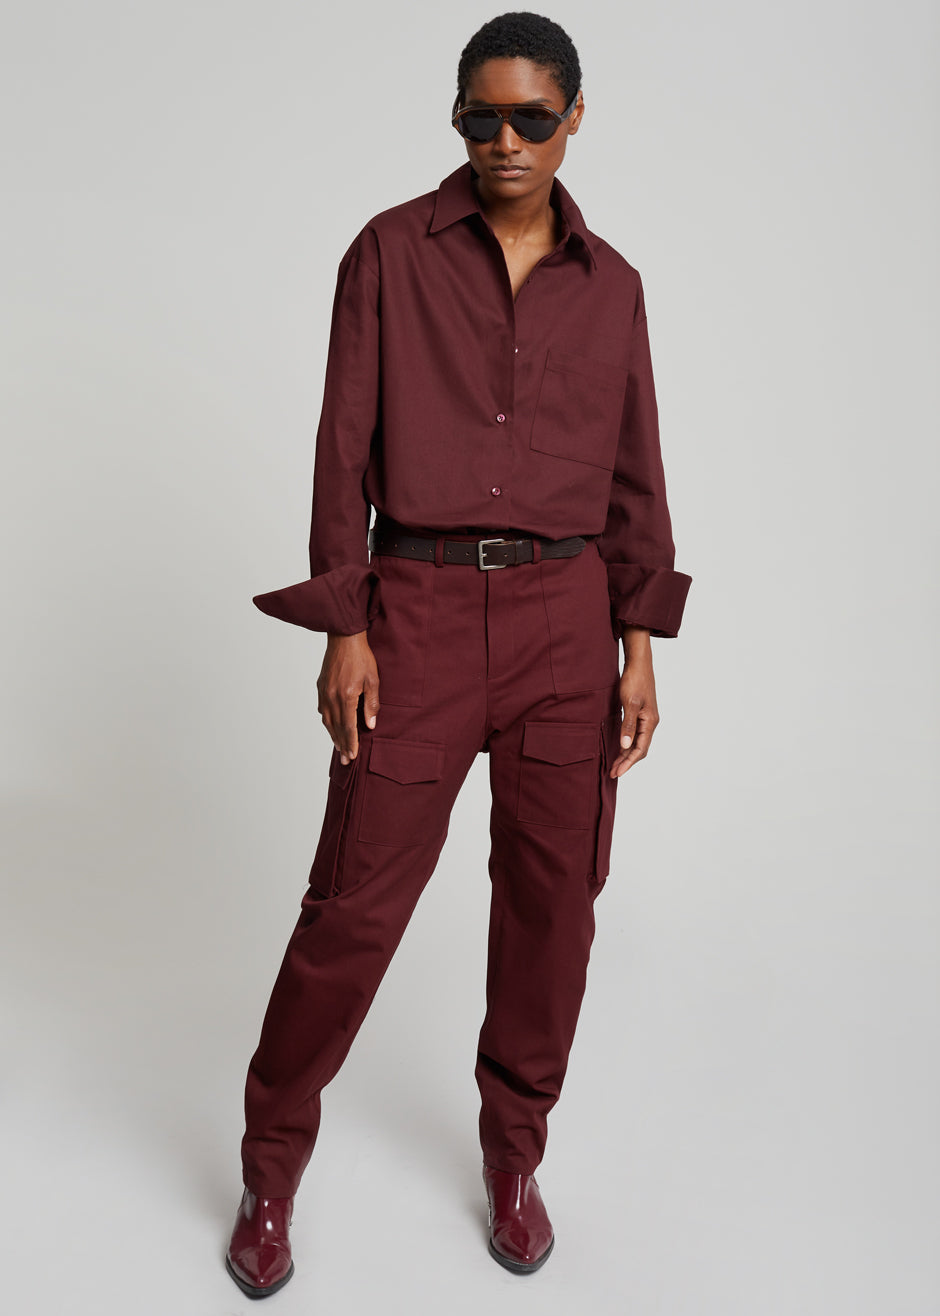 Making Moves Faux Leather Cargo Pant - Burgundy